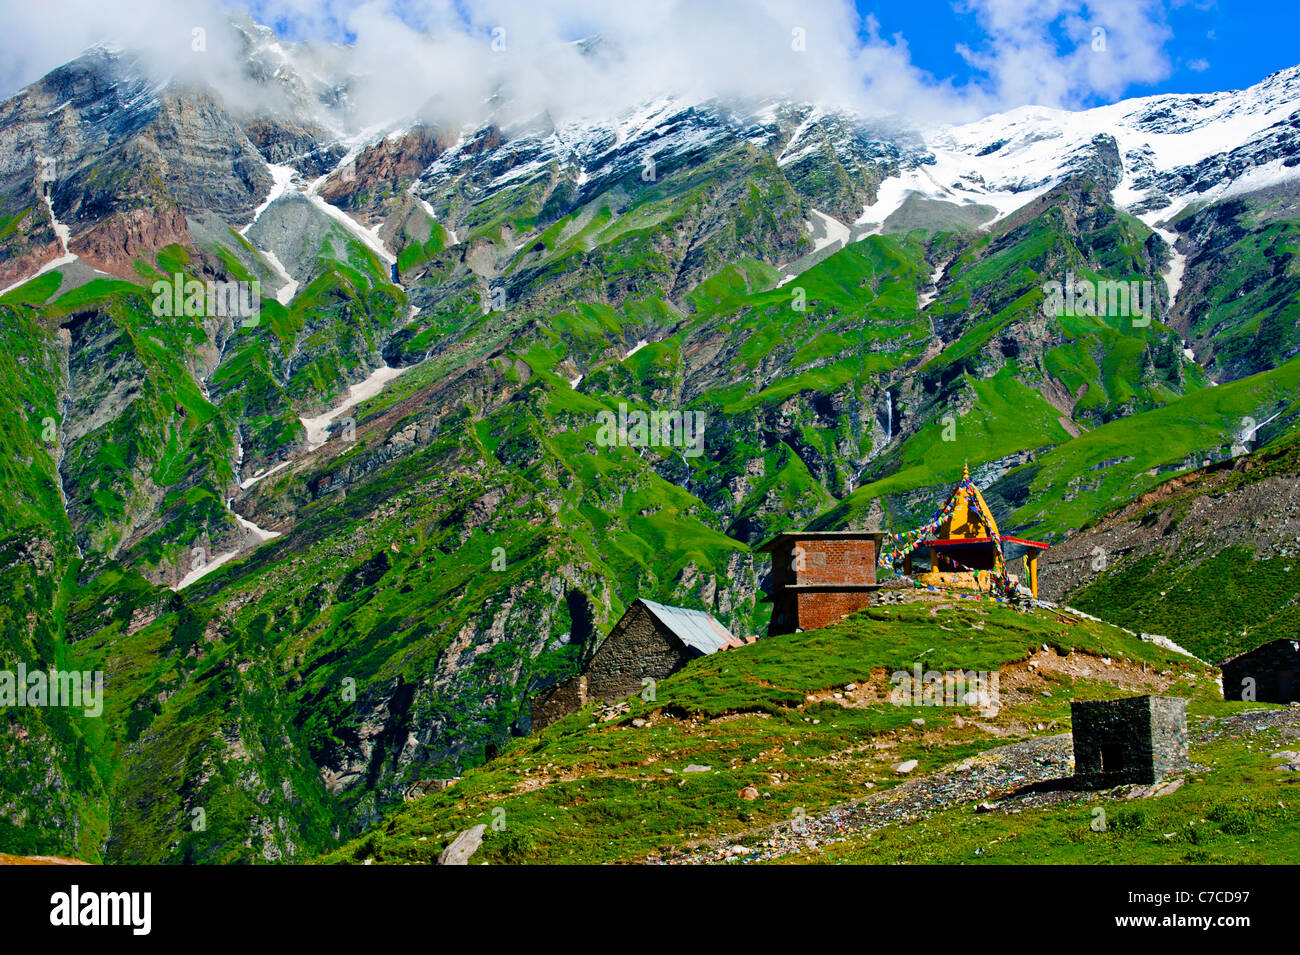 Indian Himalaya landscape with small tibetian buddhist temple and village buildings. India, Himachal Pradesh, Rohtang Pass Stock Photo